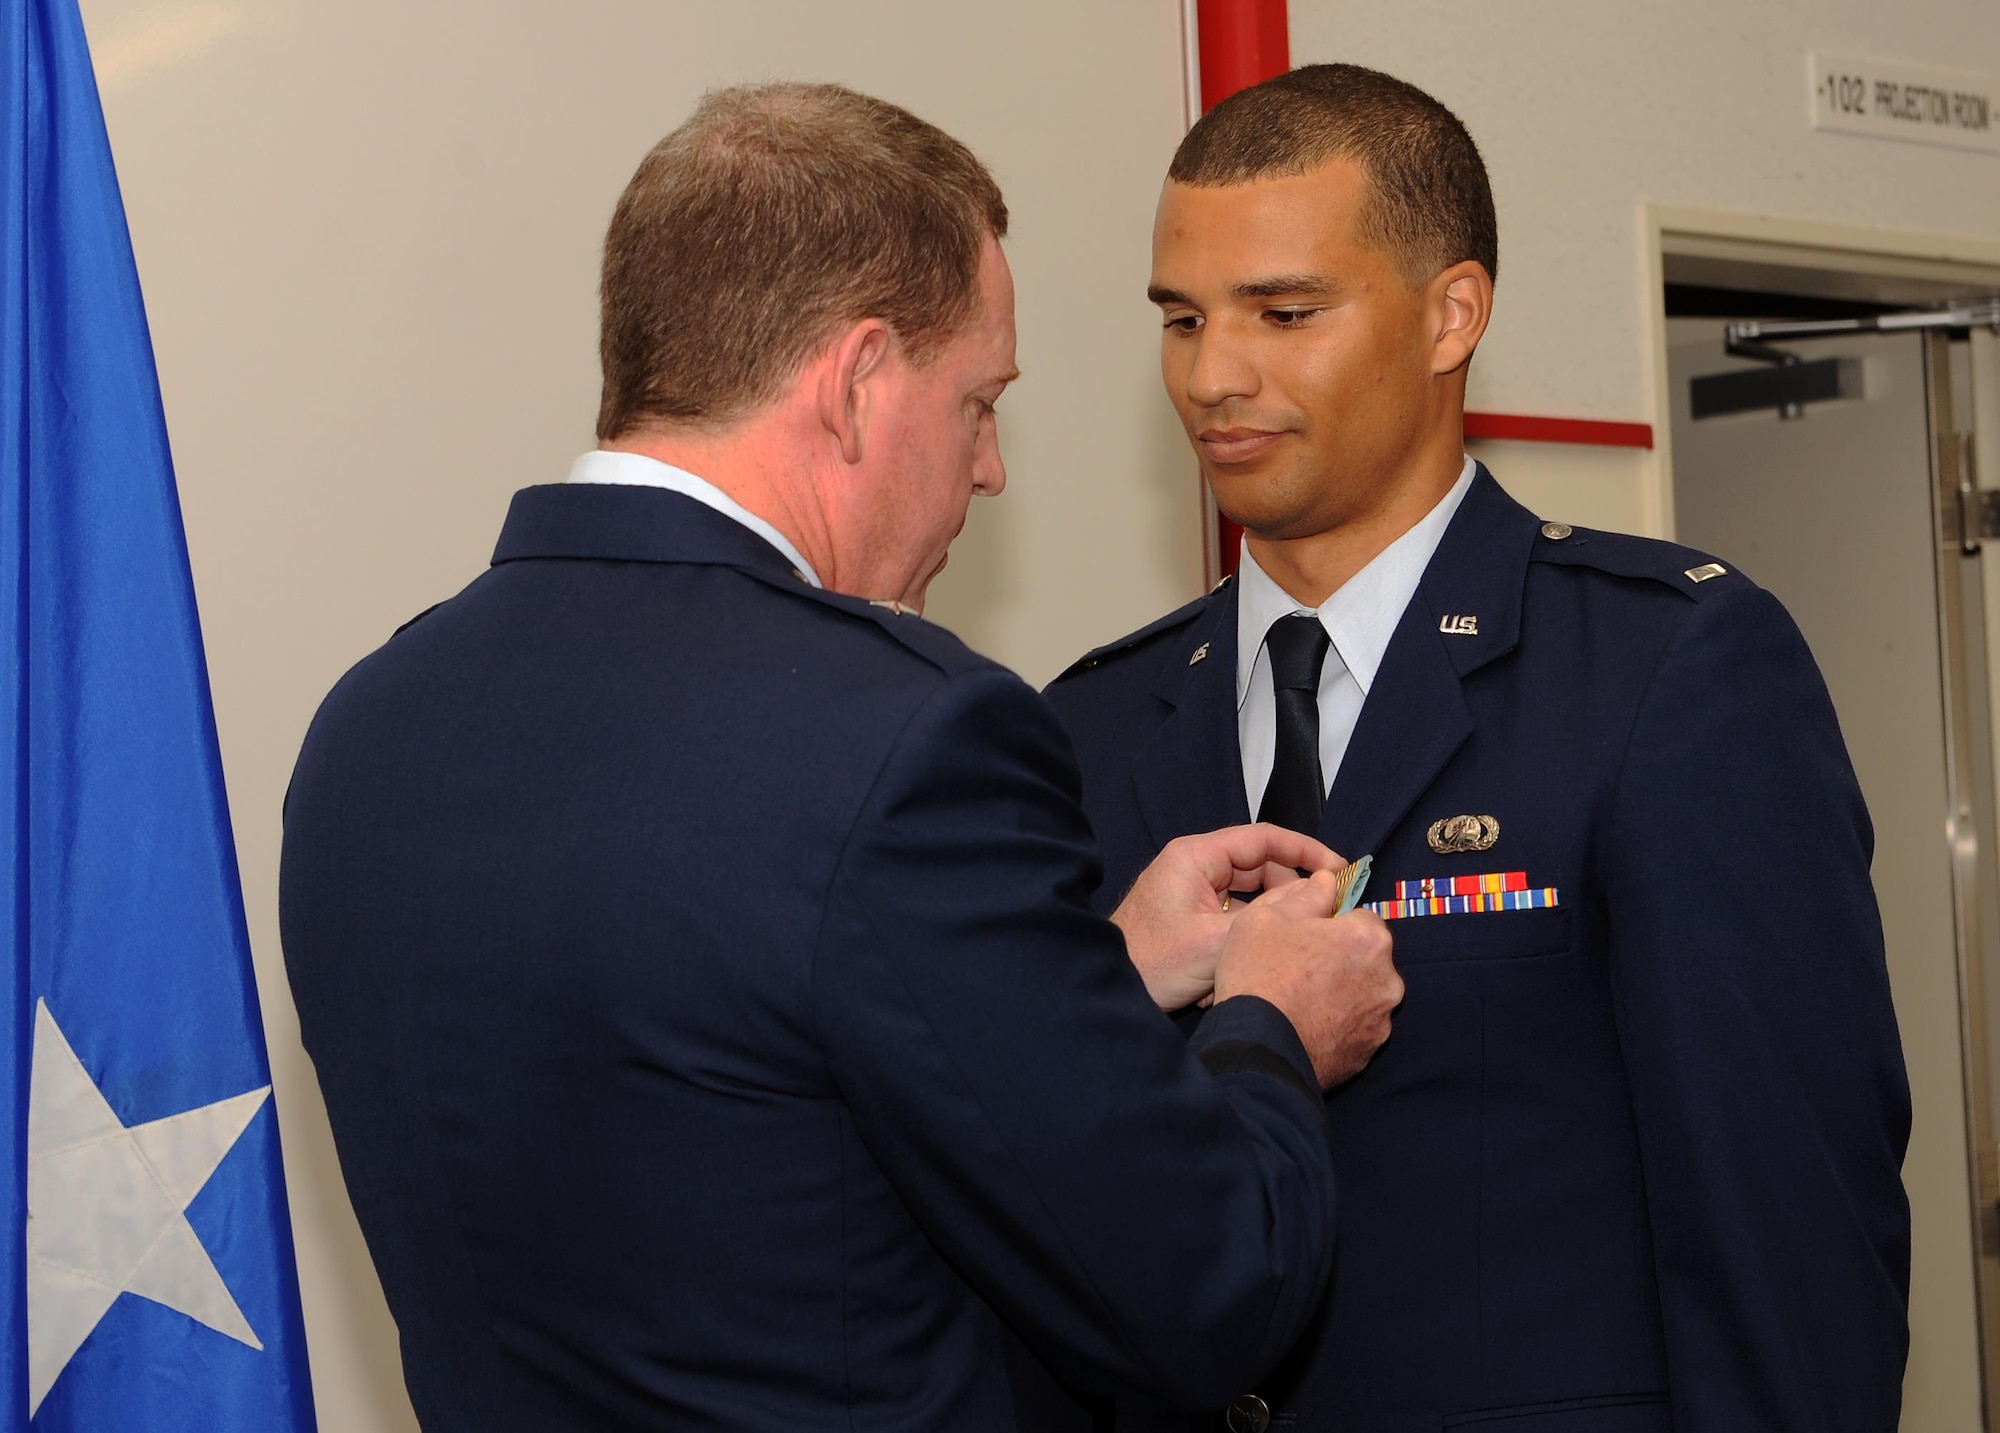 Brig. Gen. James B. Hecker pins the Airman’s Medal on 1st Lt. Dayton Gilbreath during a ceremony March 20, 2015, on Kadena Air Base, Japan. The Airman’s Medal is the Air Force’s highest noncombat honor, and is awarded to service members of any country or branch who, while serving in any capacity with the Air Force, distinguish themselves by heroic actions in a non-combat environment. Hecker is the commander of the 18th Wing and Gilbreath is a contracting administrator assigned to the 18th Contracting Squadron.  (U.S. Air Force photo/Airman 1st Class Zade C. Vadnais)
